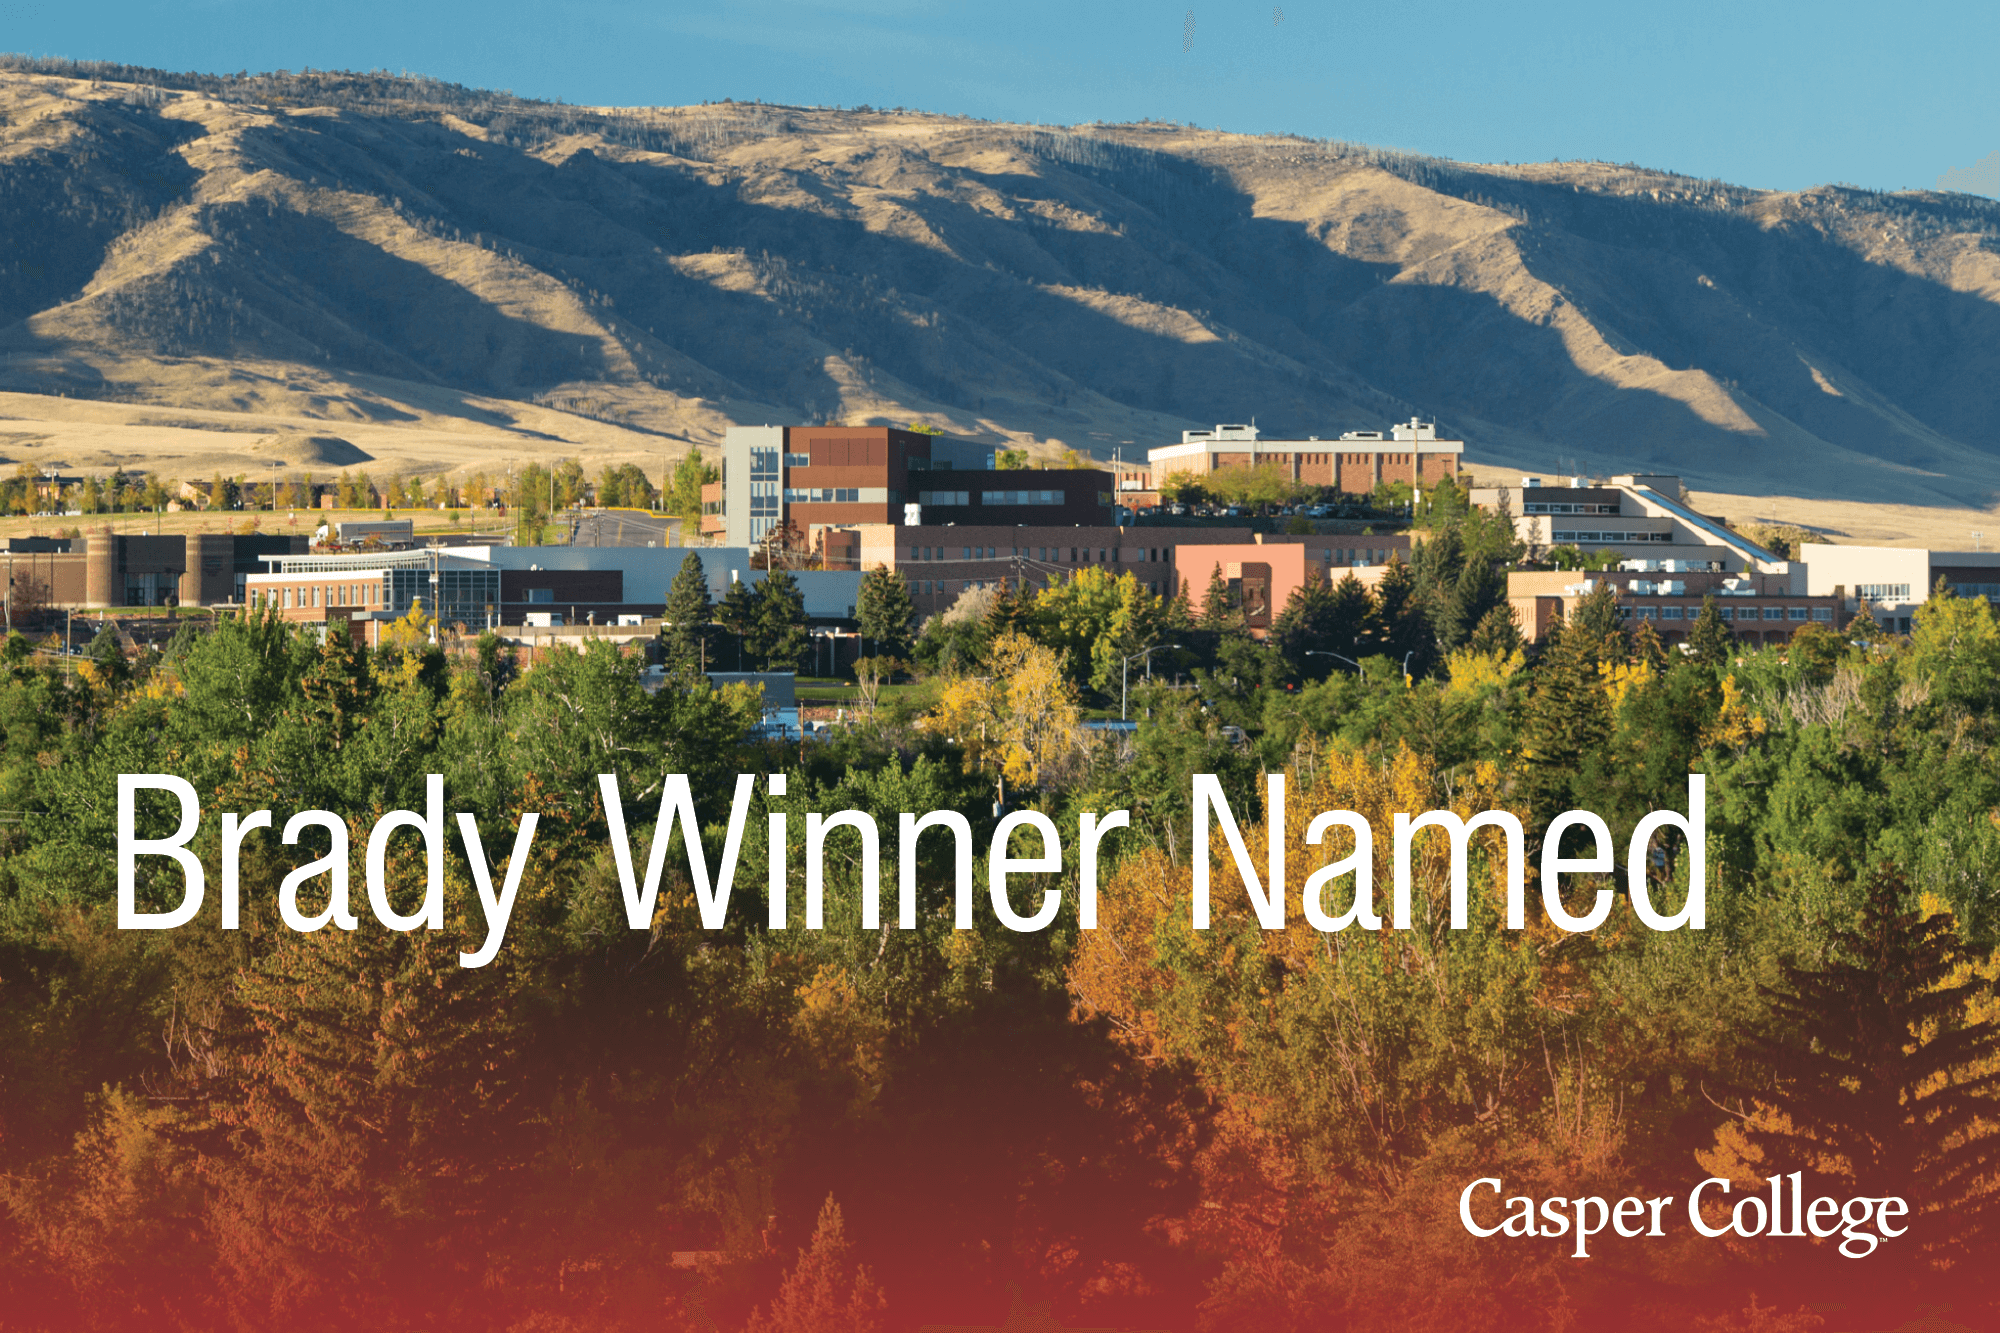 Photograph of the Casper College campus with the words "Brady Winner Named."